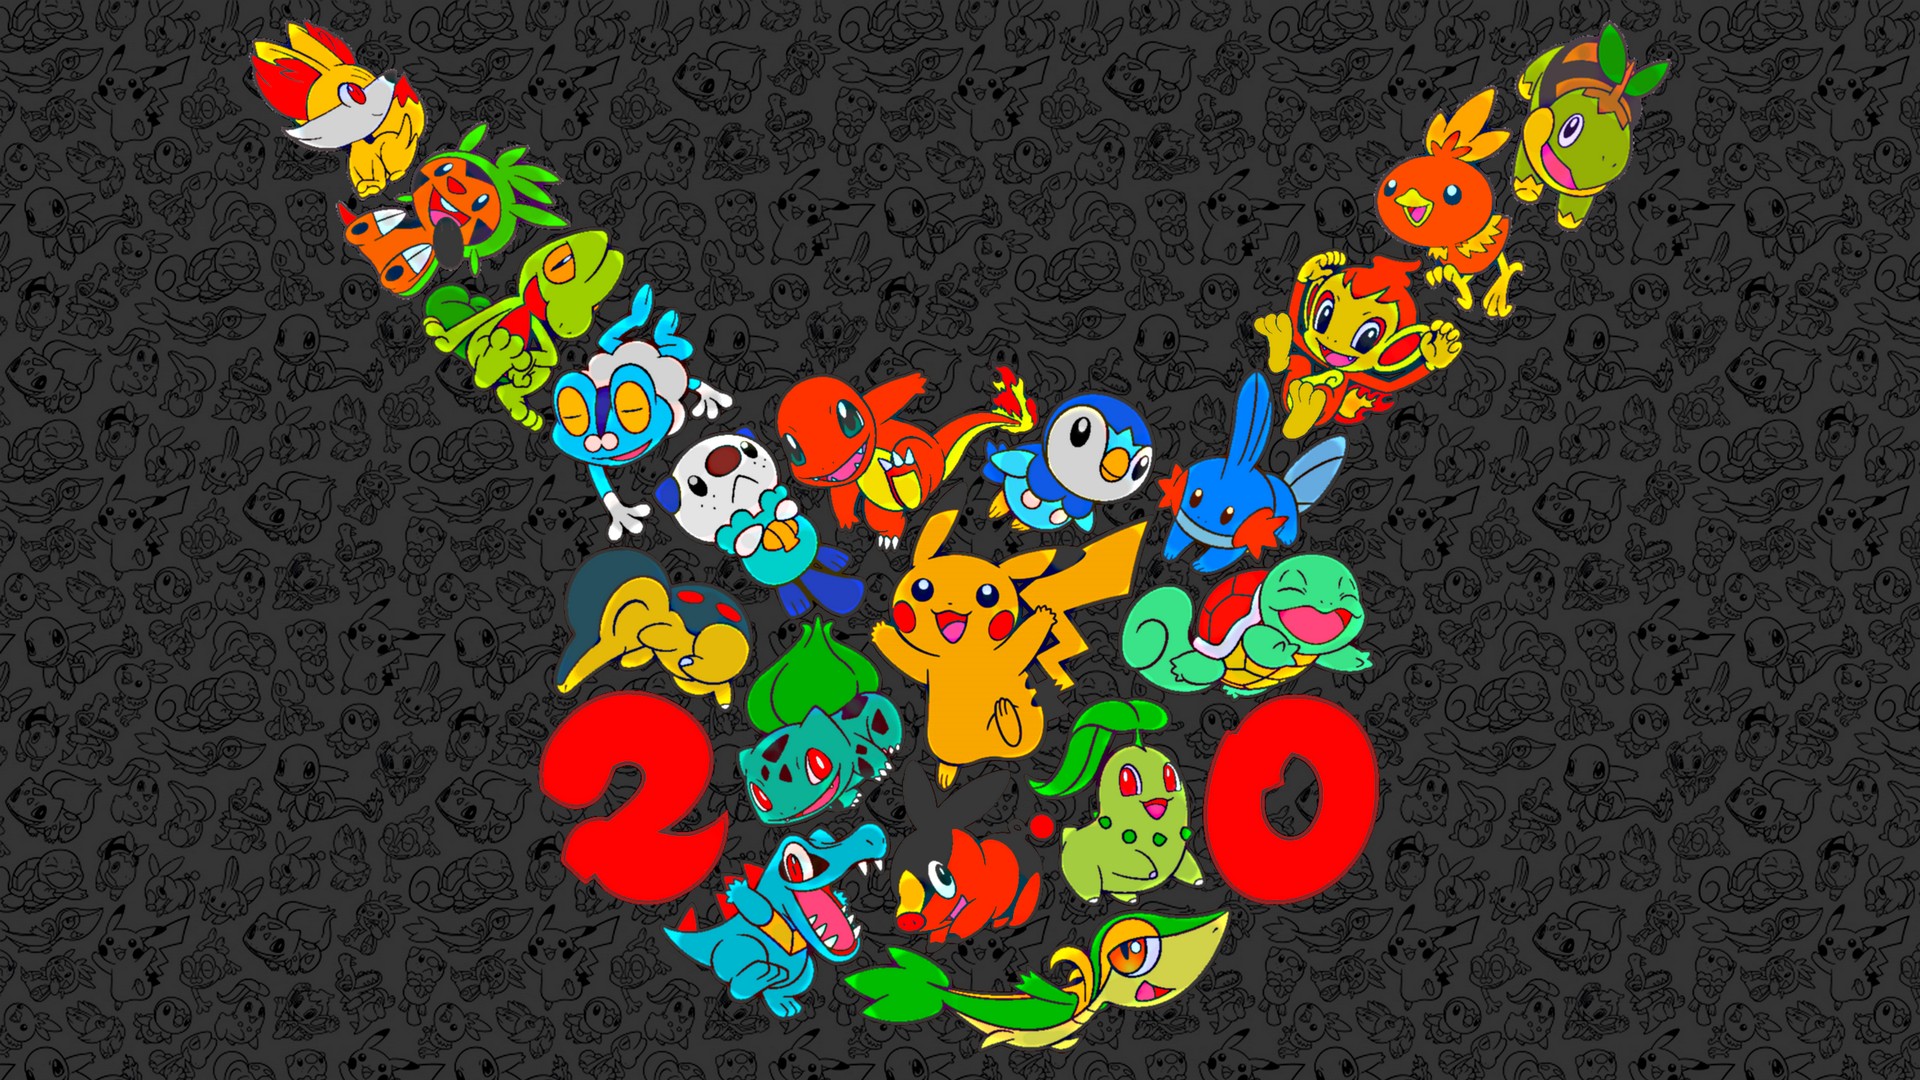 Wallpaper Pokemon with high-resolution 1920x1080 pixel. You can use this wallpaper for your Windows and Mac OS computers as well as your Android and iPhone smartphones